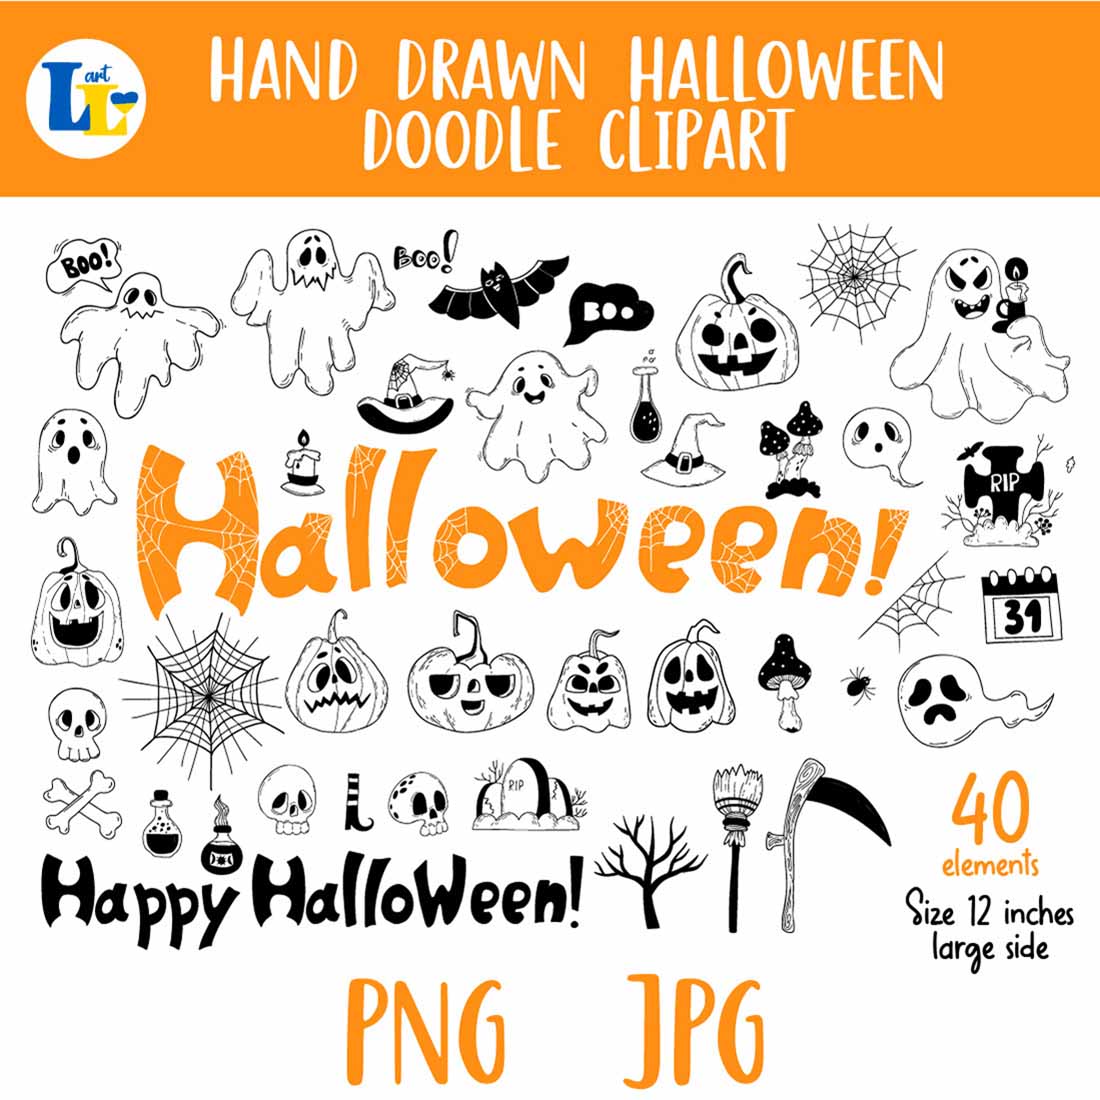 Halloween Hand Drawn Doodle Clipart previews.